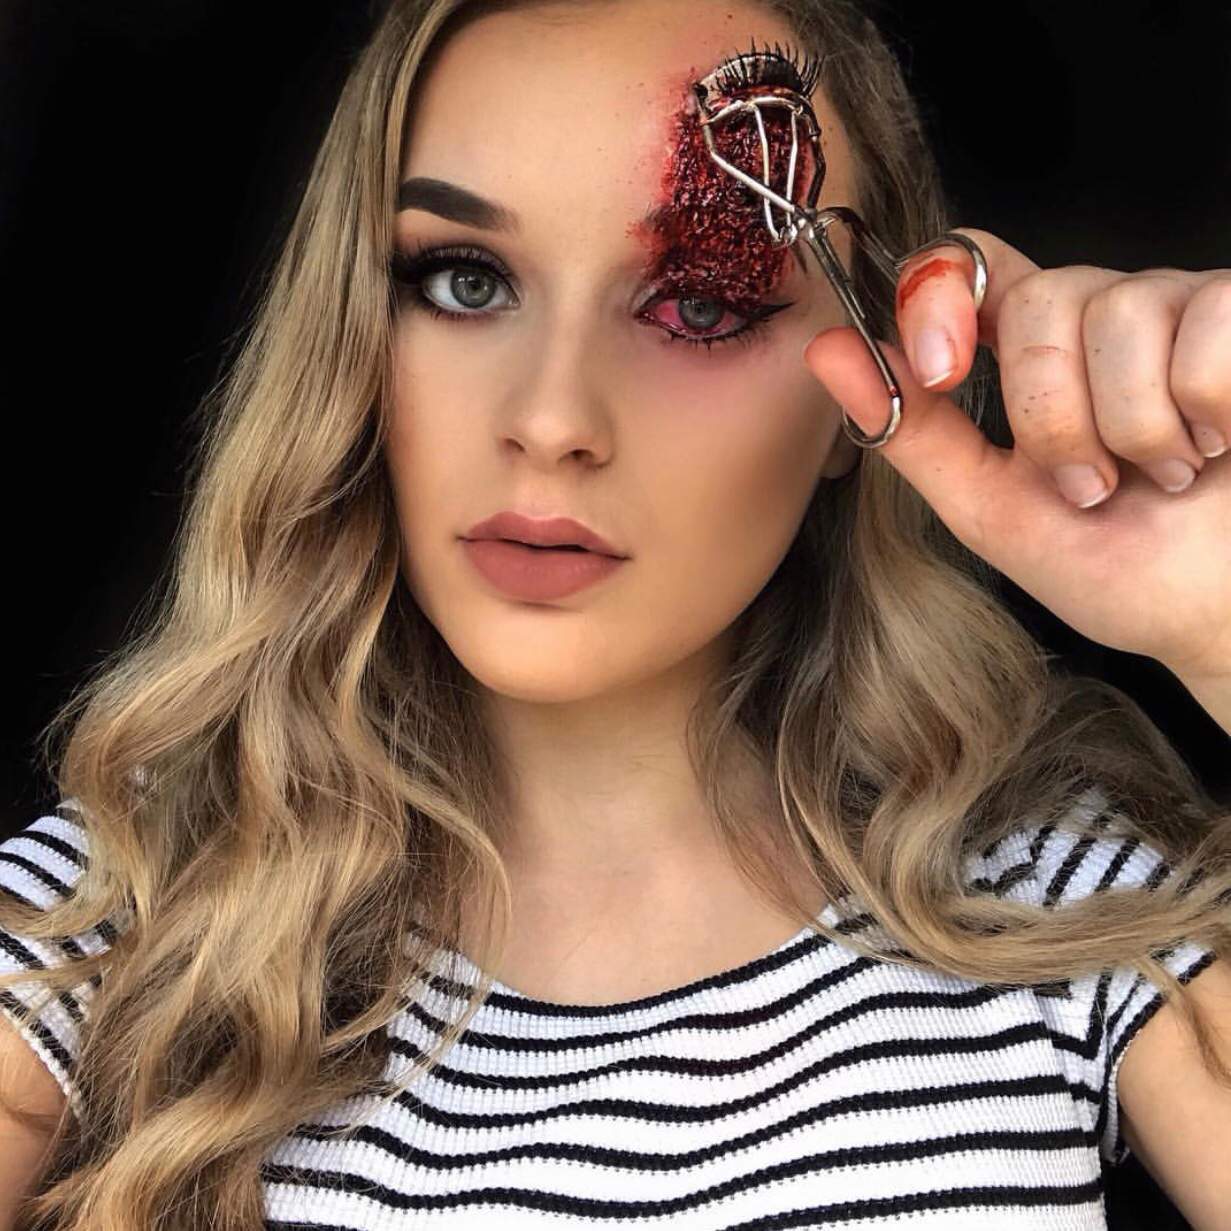 Meet the 20-year-old from Warrington with incredible Halloween SFX makeup  skills - Cheshire Live